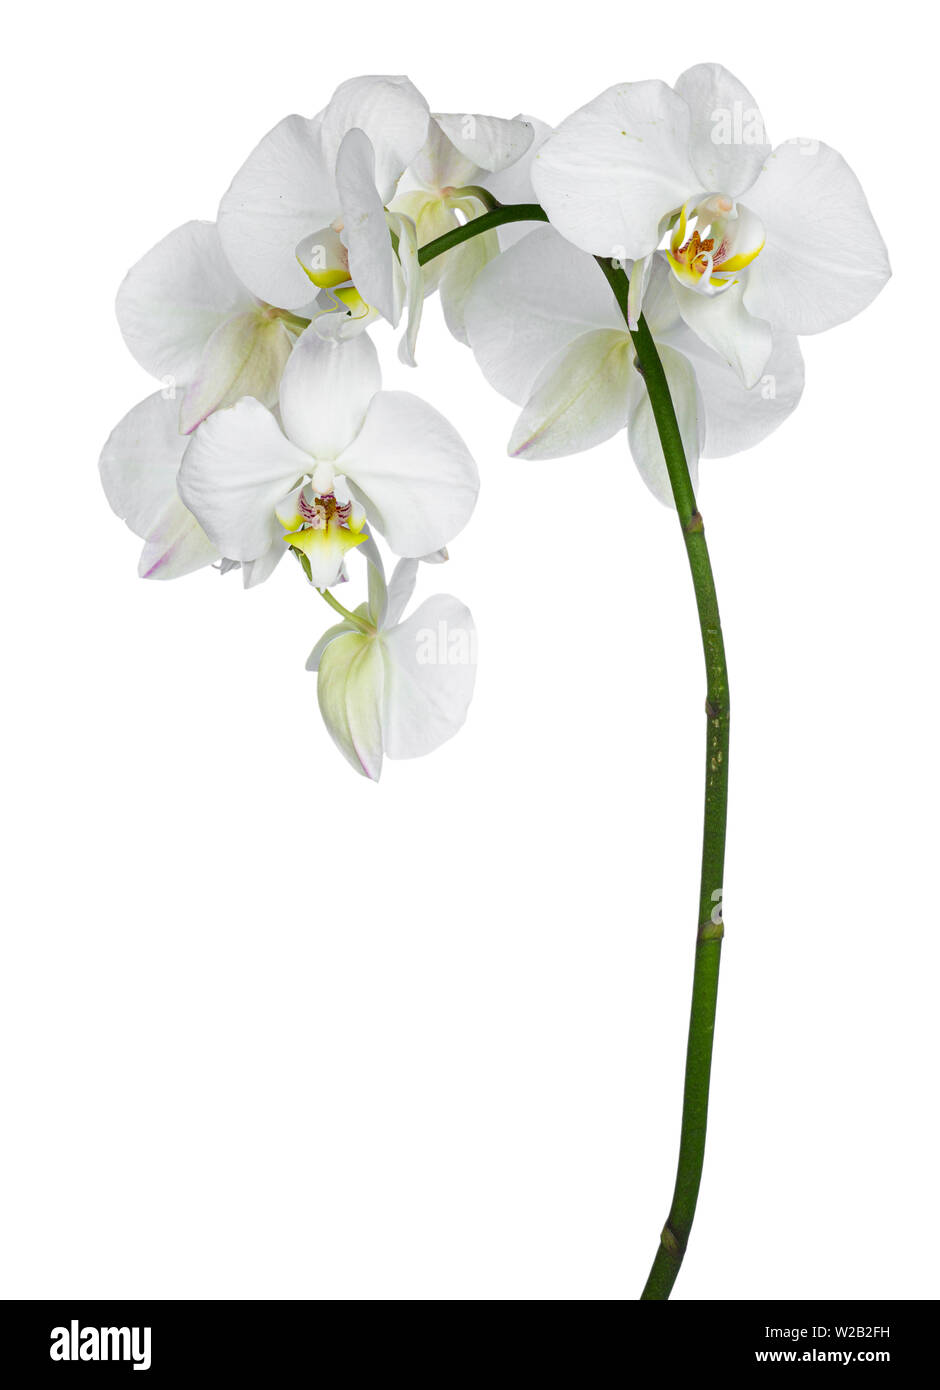 Side view of white Phalaenopsis Orchids flowers on curved branch. Isolated on a white background. Stock Photo